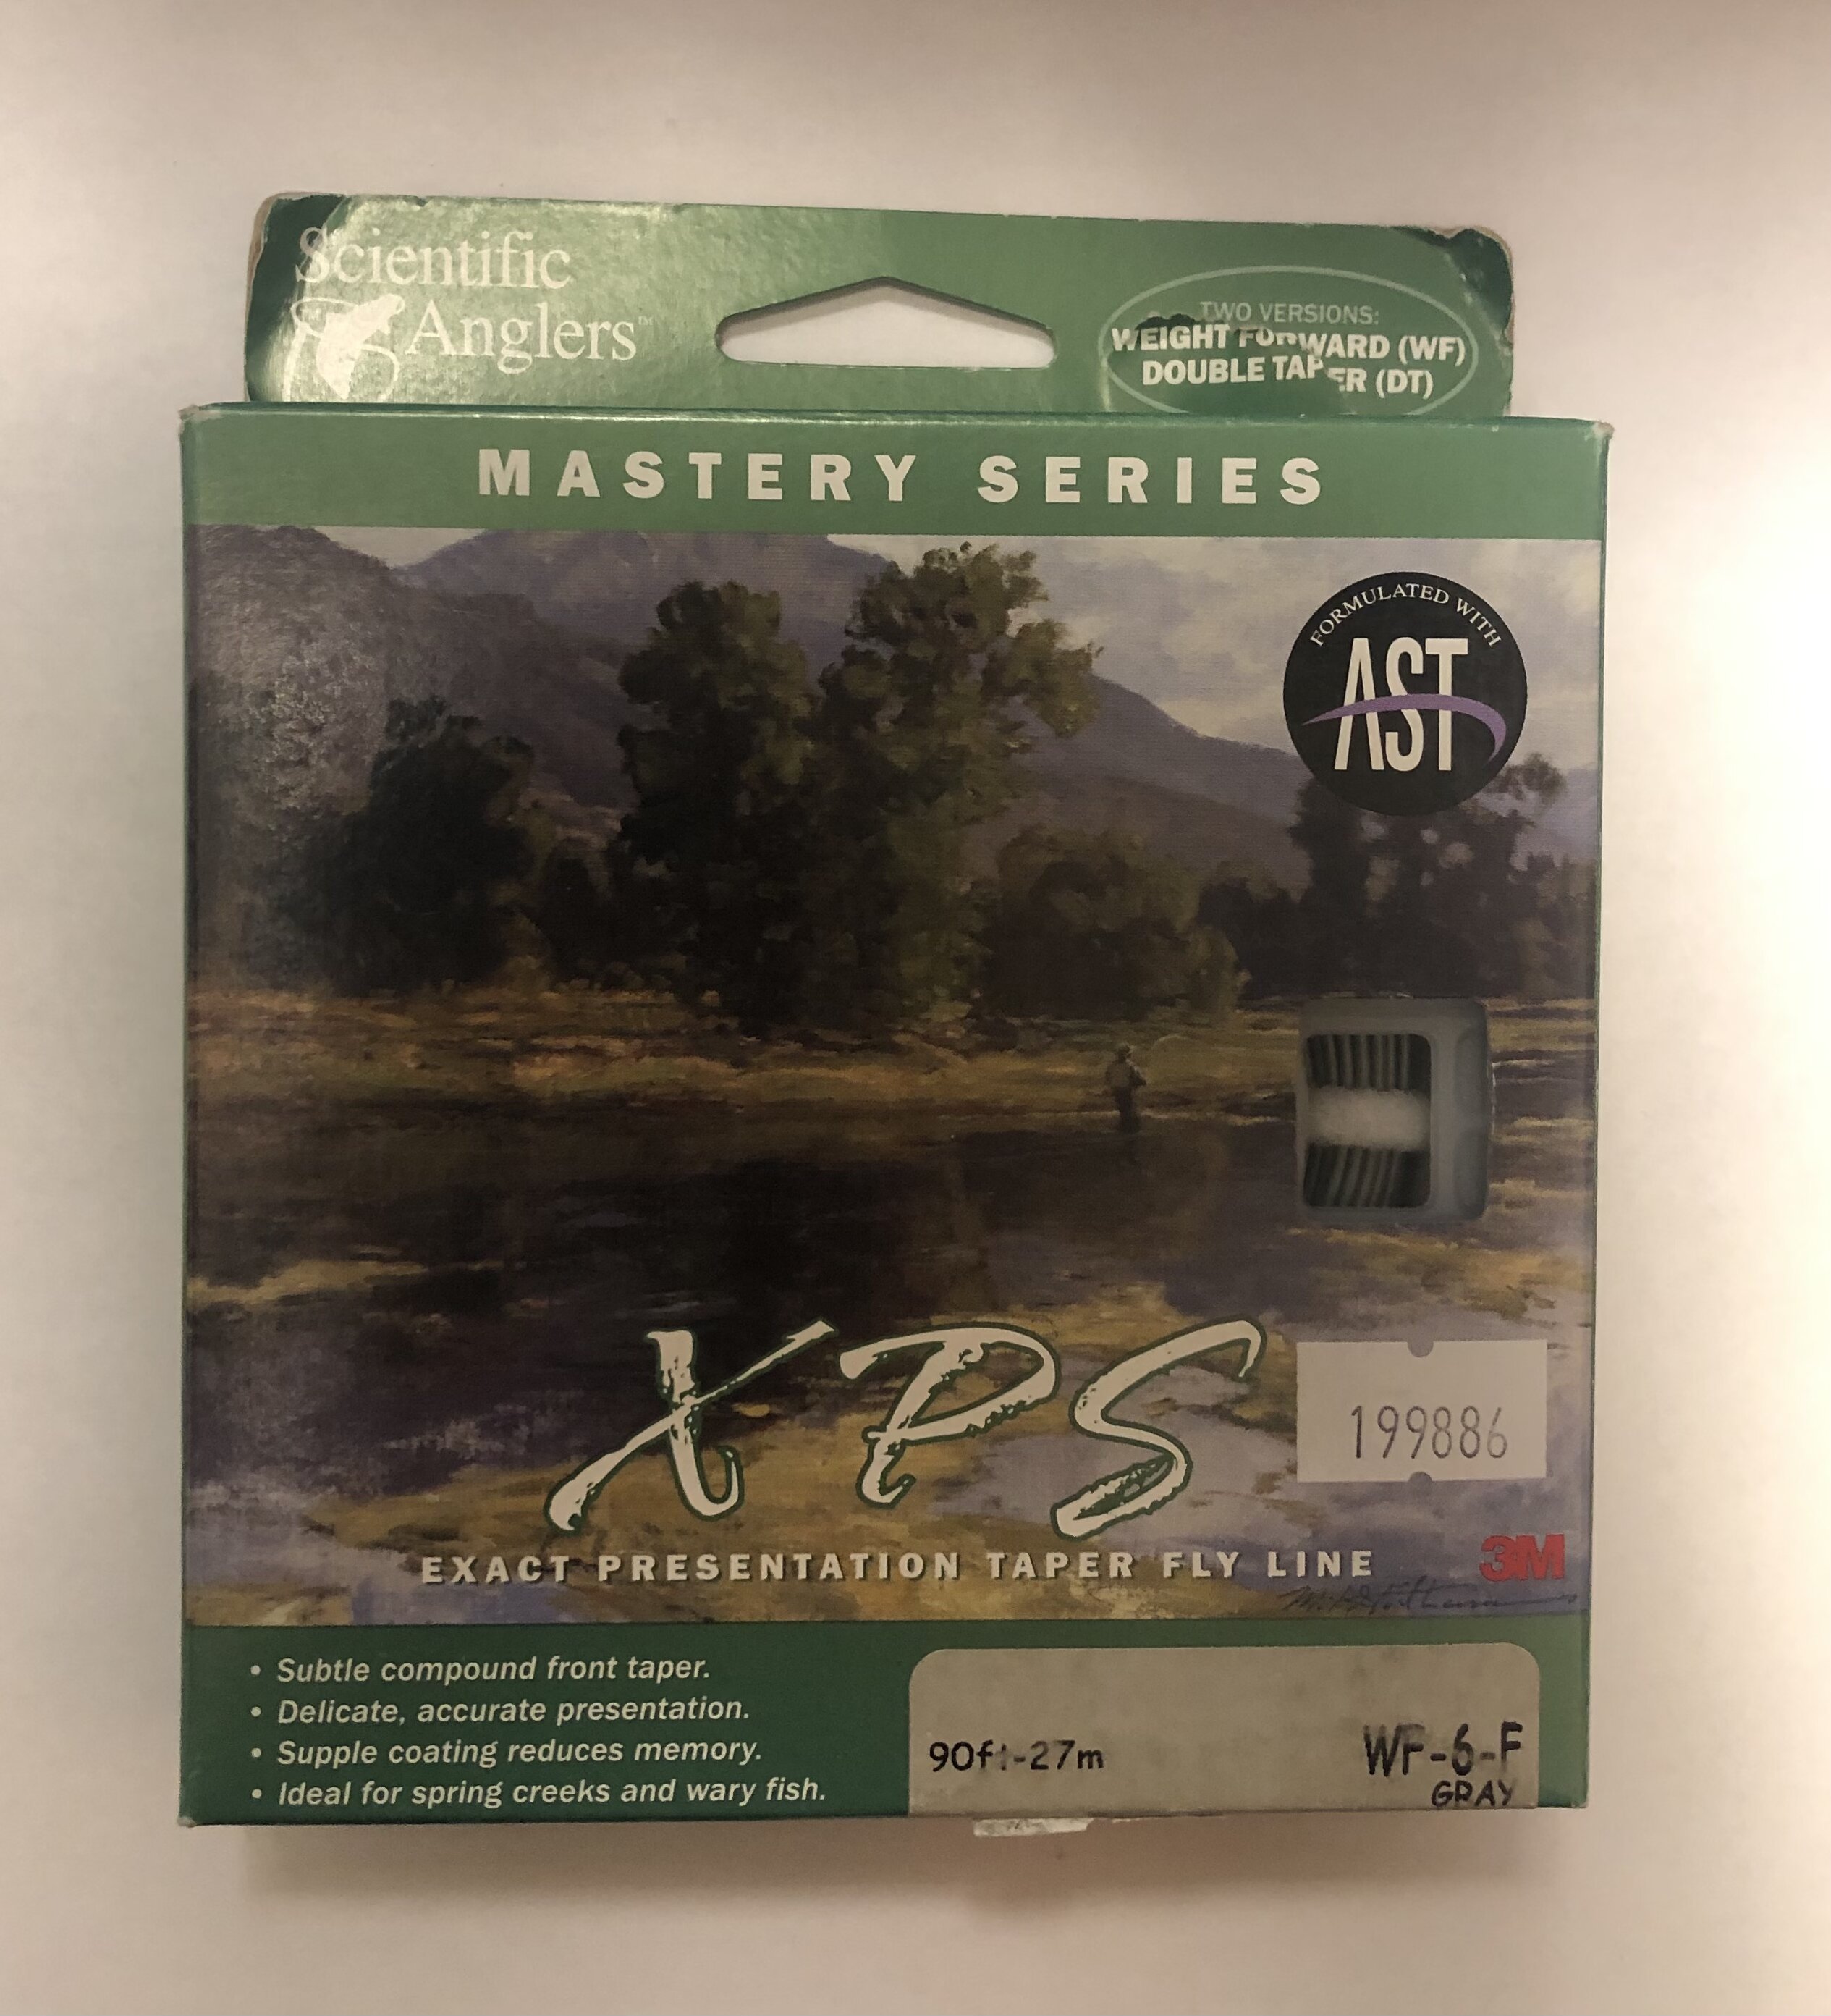 Scientific Anglers Mastery XPS We have fly lines from all th